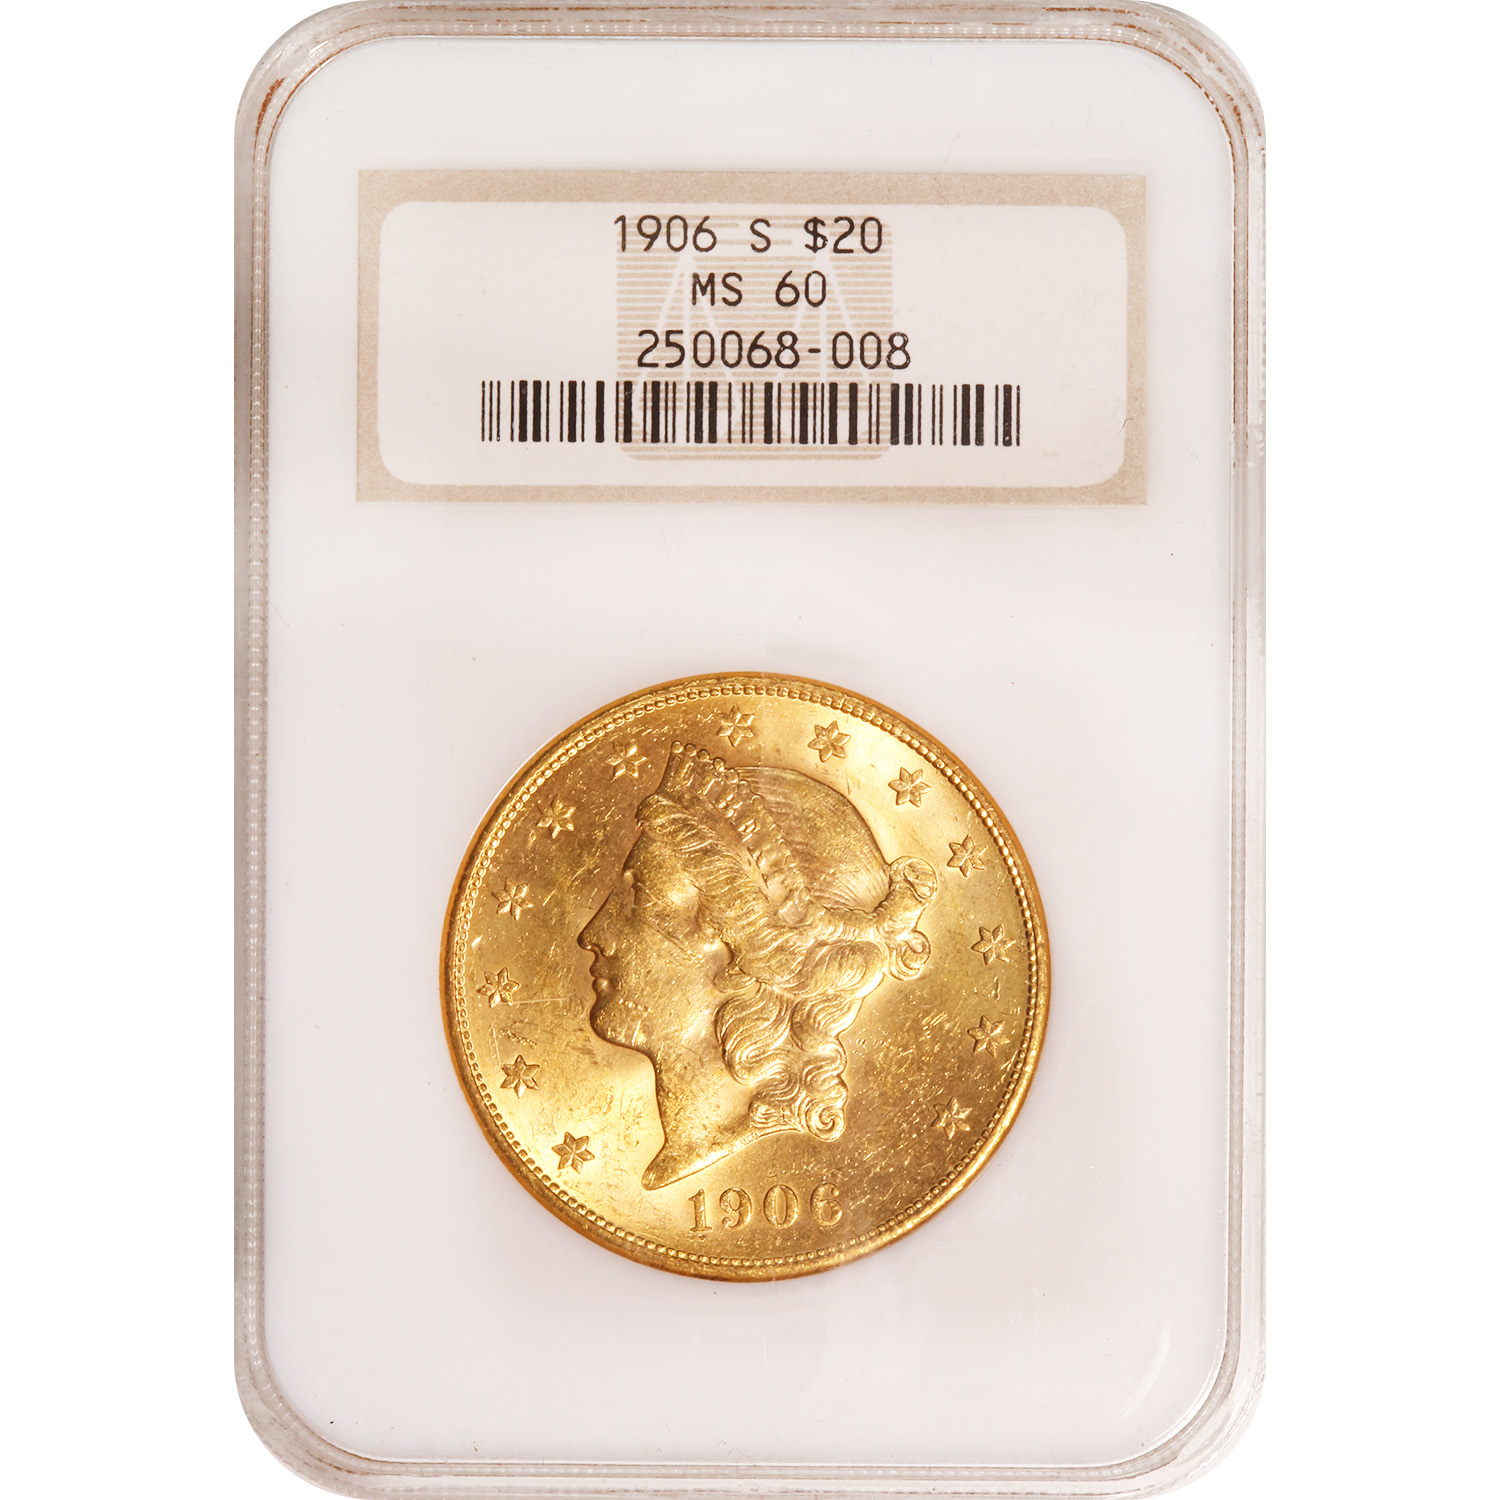 Certified US Gold $20 Liberty 1906-S MS60 NGC